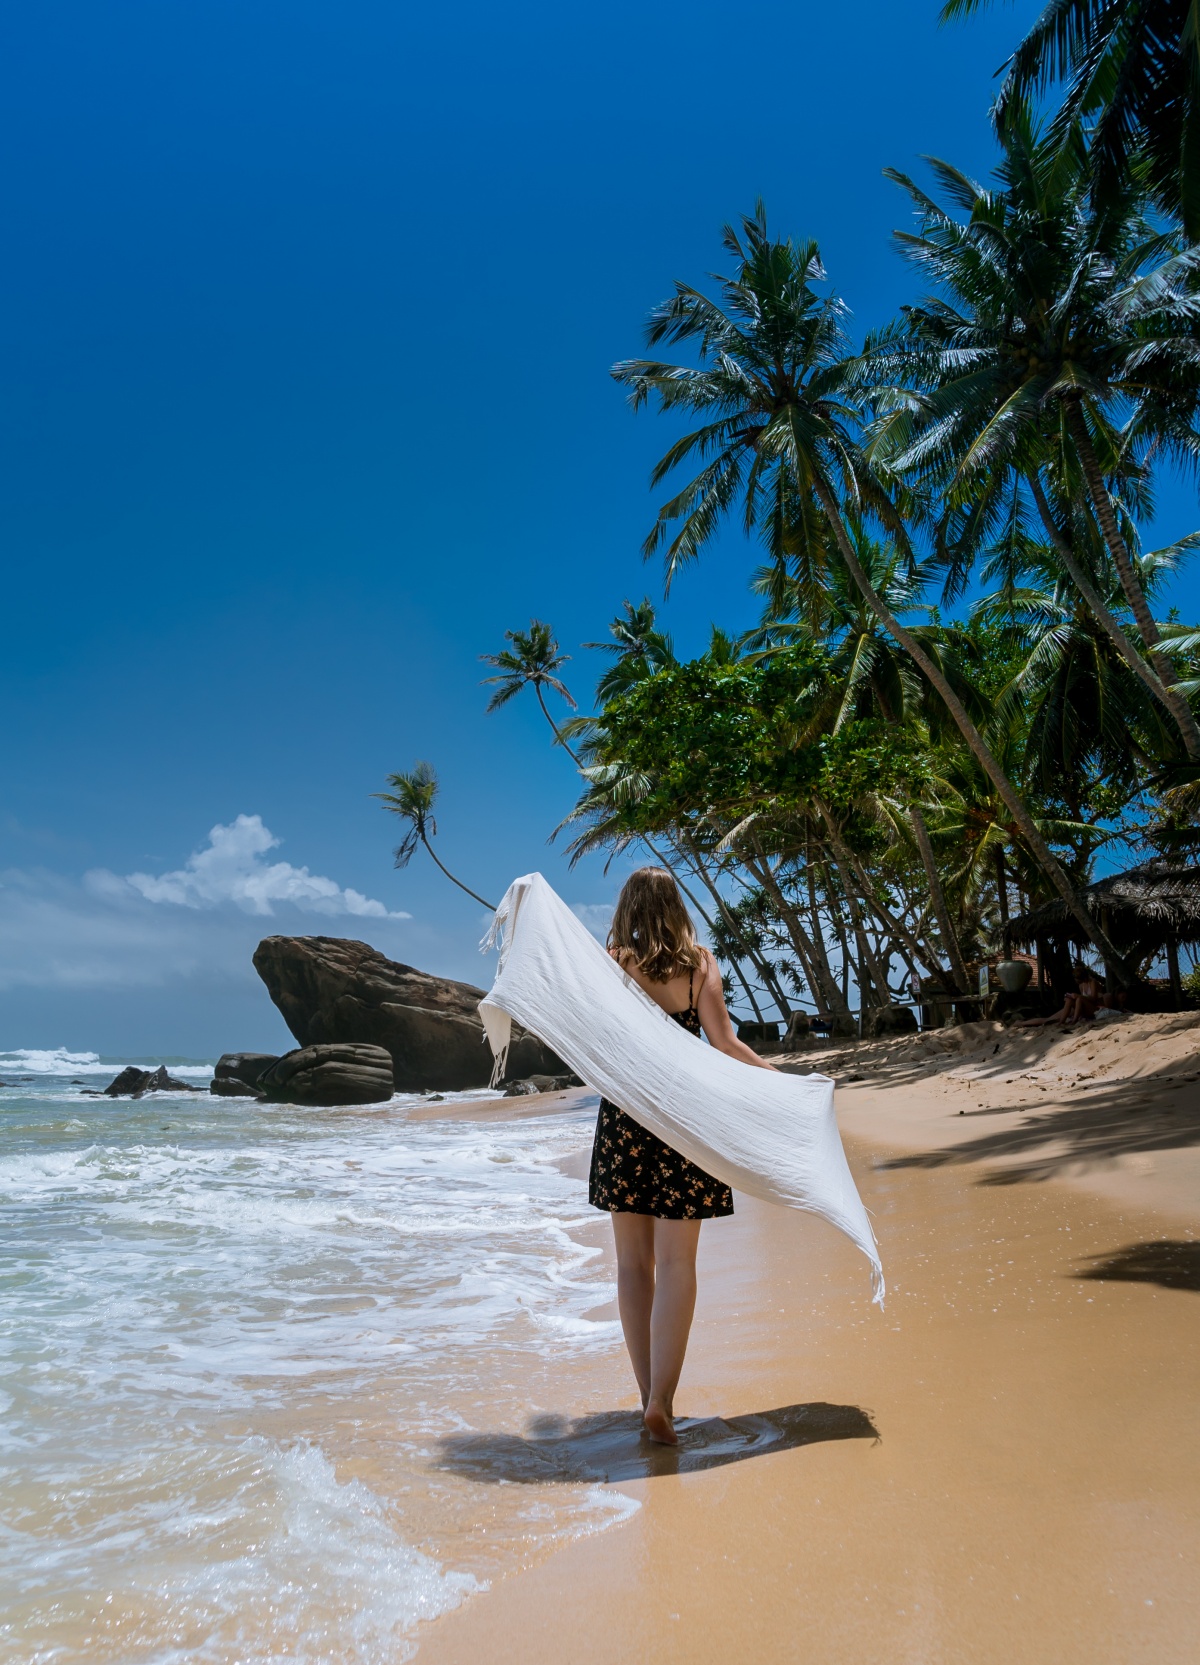 Royalty free photo of woman and beautiful beach paradise | Wandervisions